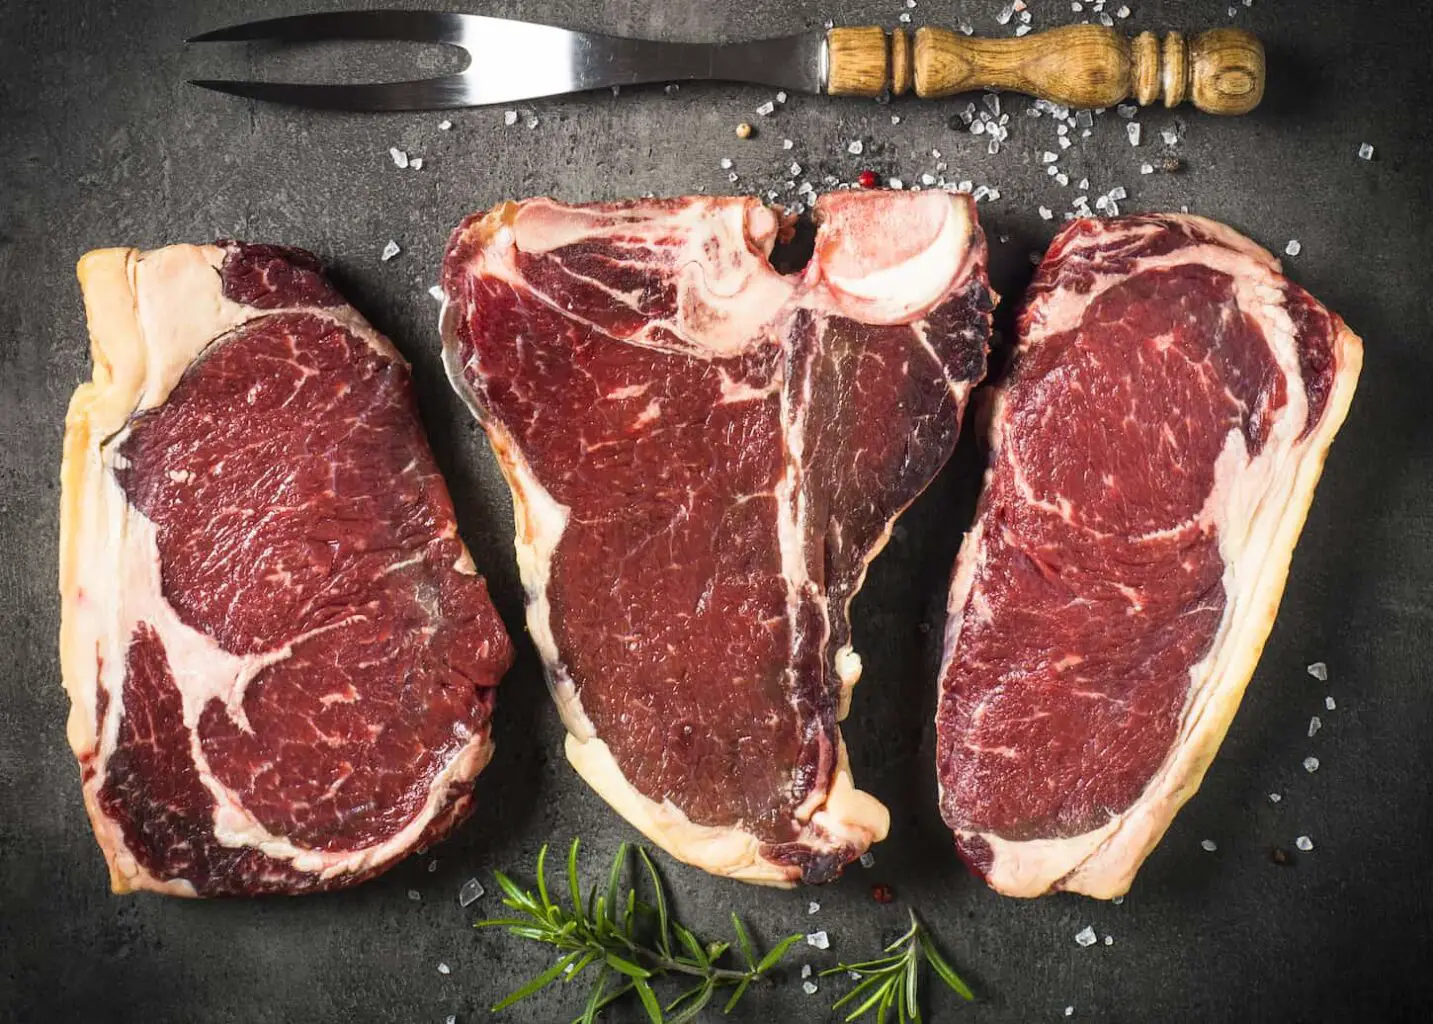 An image of a dry aged beef steaks in a gray background.